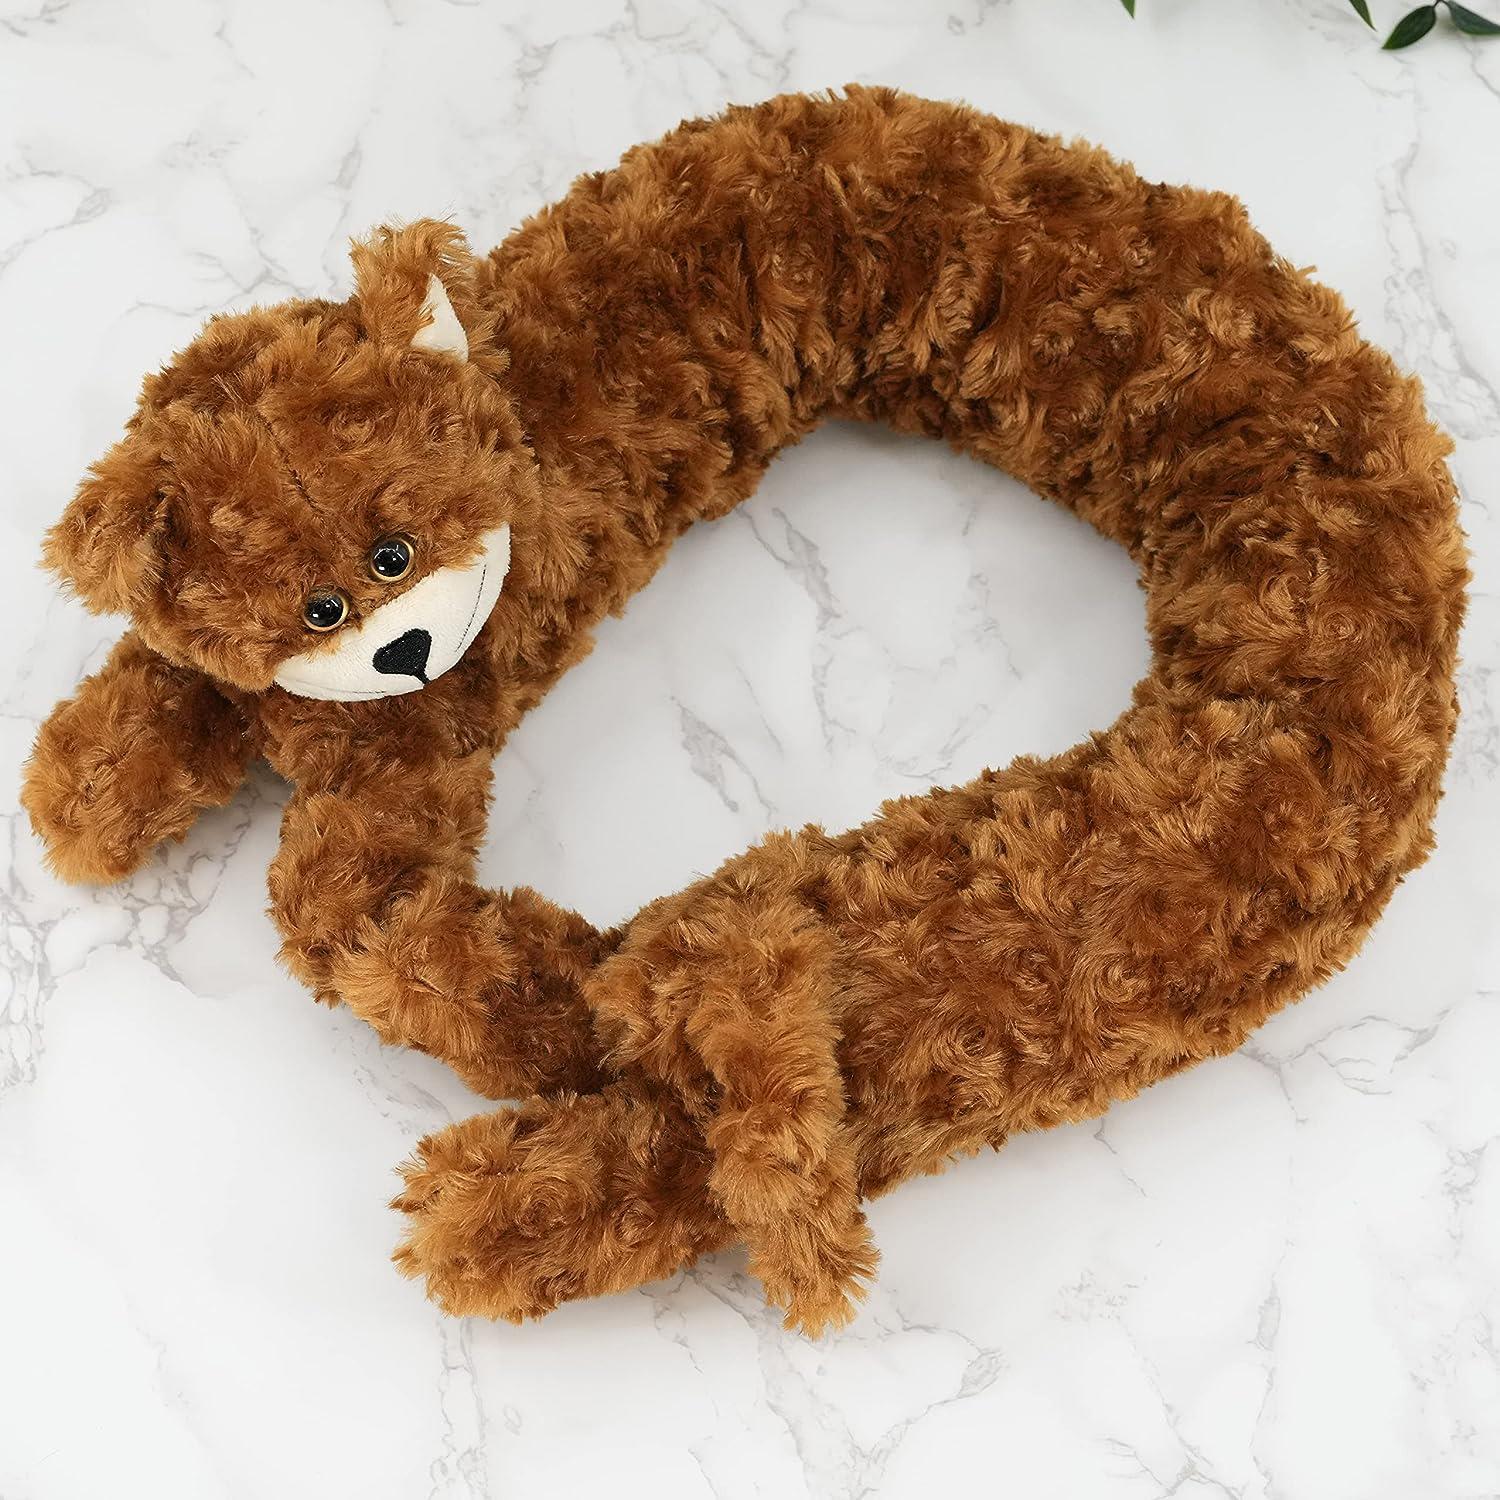 Novelty Brown Cat Micro-Fleece Excluder by Geezy - The Magic Toy Shop